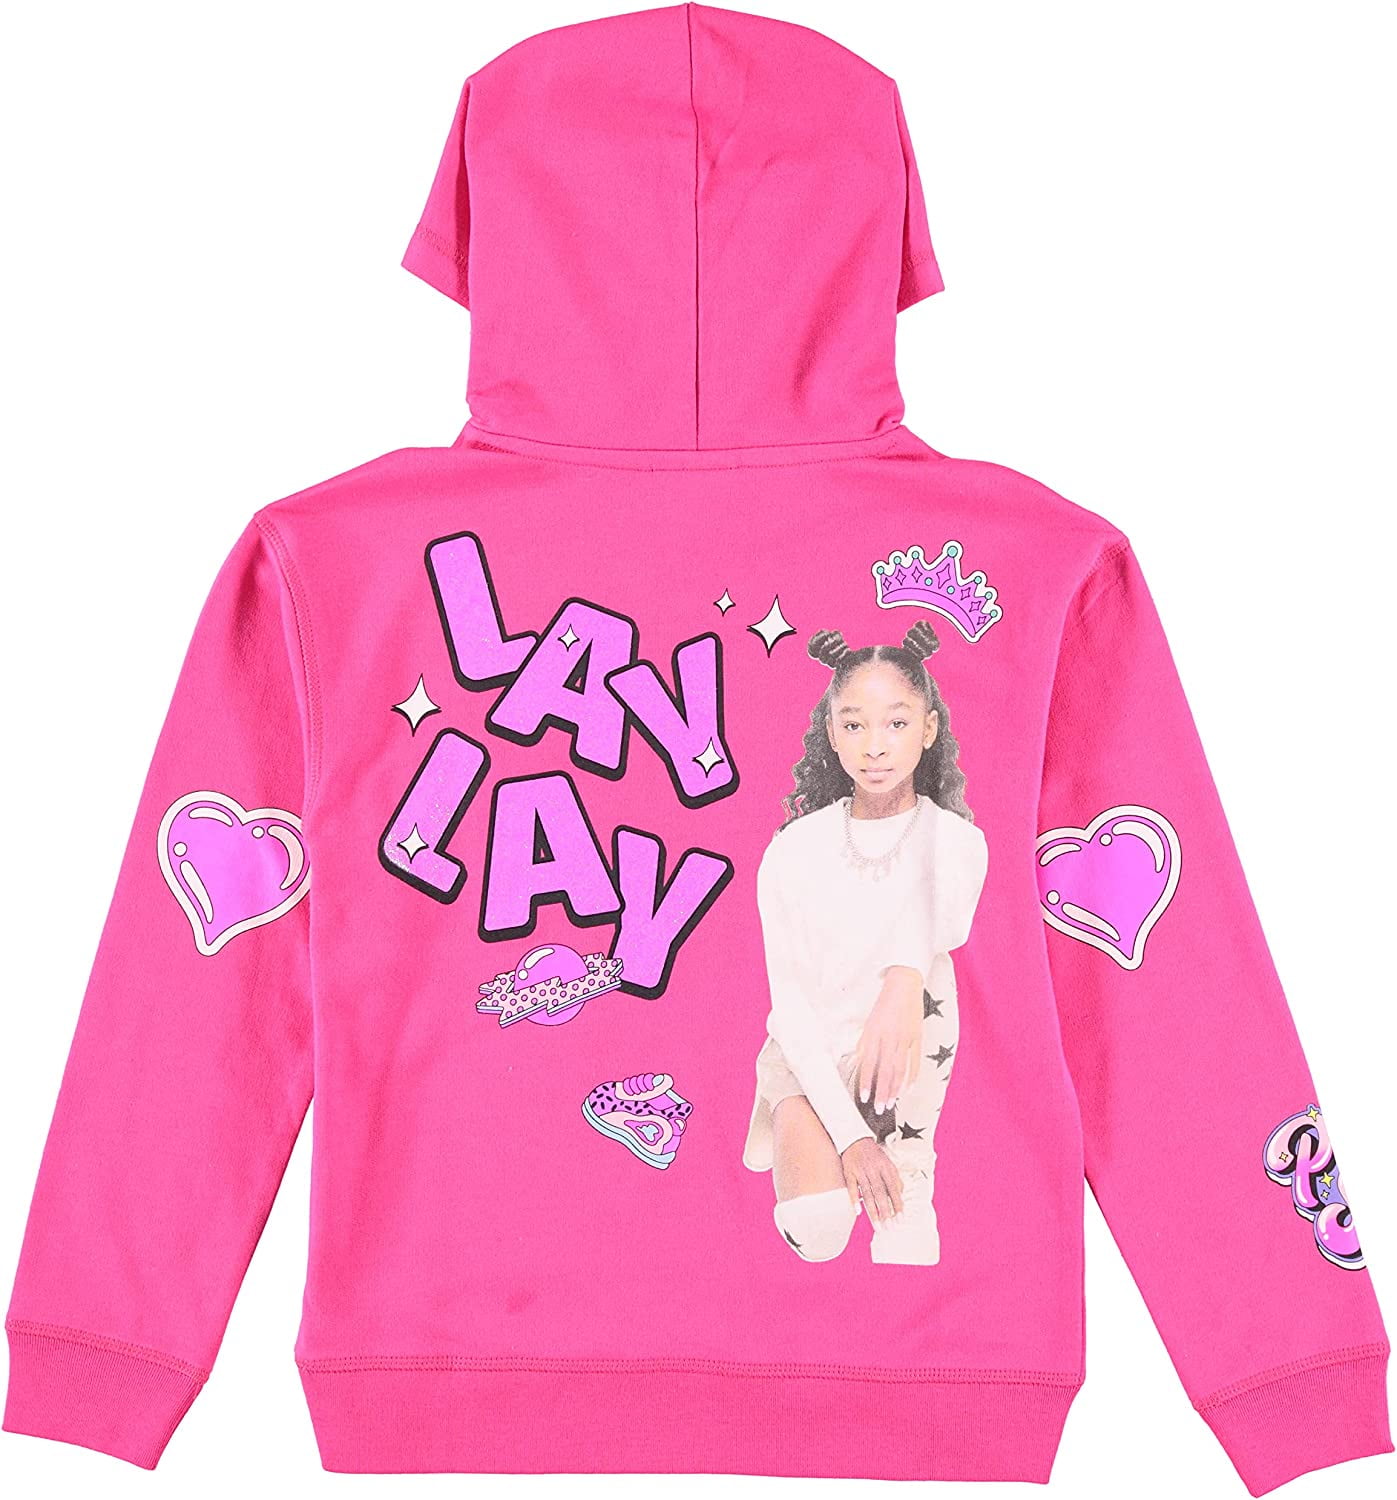 Nickelodeon Girl Lay Lay Free Style Hoodie -That Girl LAYLAY Pullover Hoodie- Sizes 4-16 14-16 Hot Pink - Walmart.com